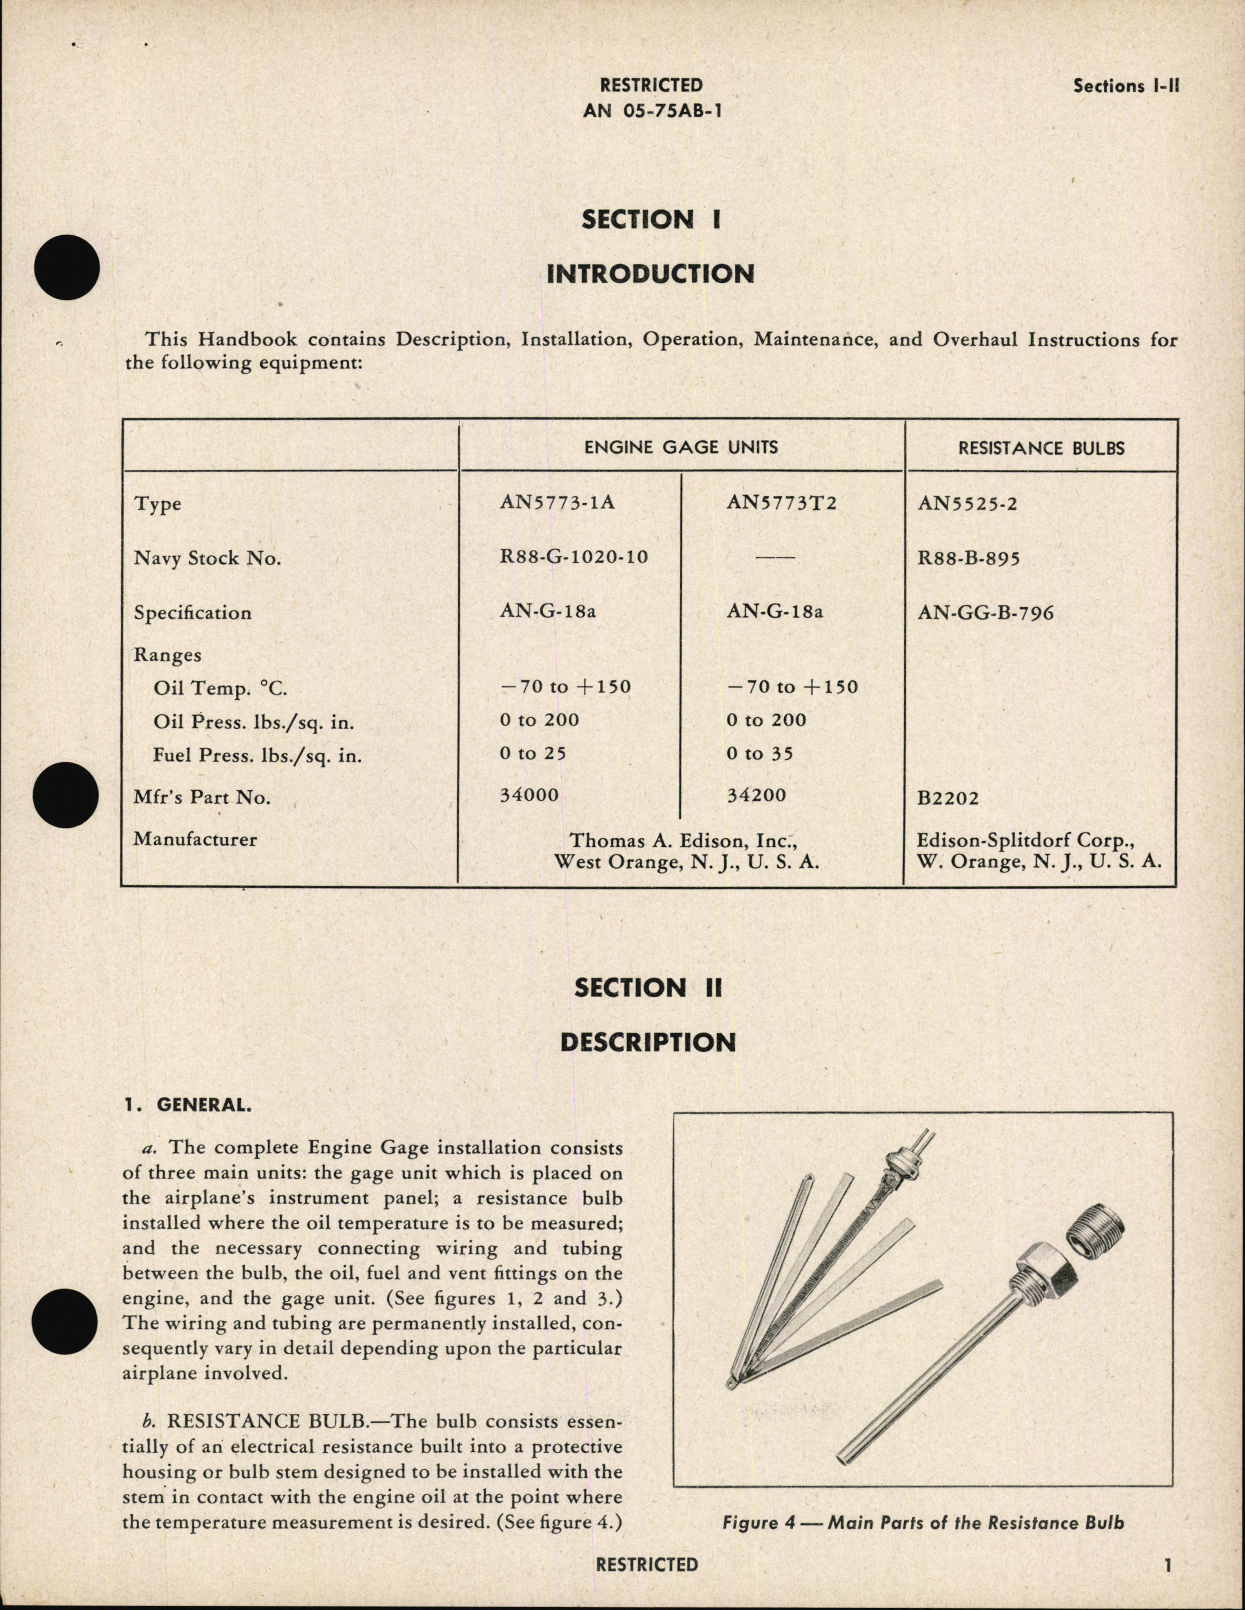 Sample page 5 from AirCorps Library document: Operation, Service, & Overhaul Instructions with Parts Catalog for Engine Gage Units